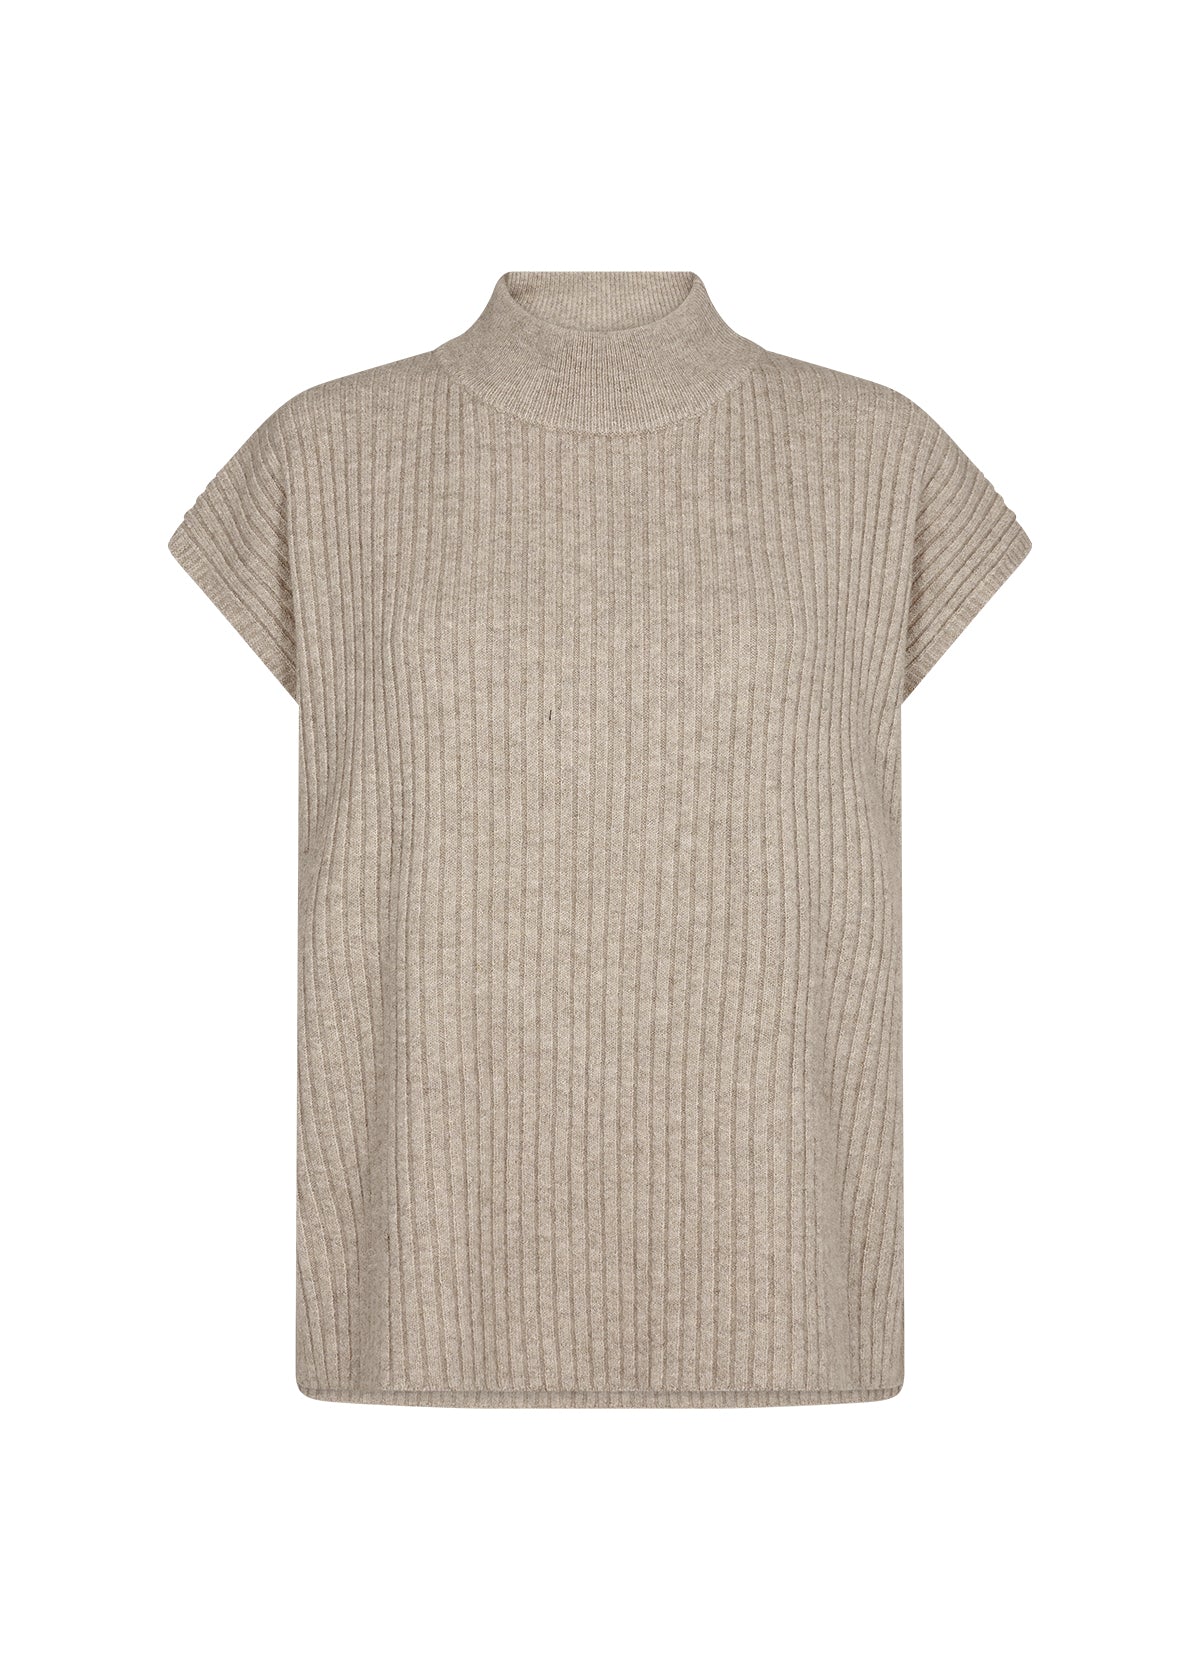 The Tamira Top from Soya Concept is a classic knitted top in a drop shoulder sleeveless style made for the warm autumn days. It has a high neckline, a rib knitted design, a loose fit and slits on both sides to give you all day comfort and style. Style this over a basic long sleeve shirt and a skirt for a look that you can take from the office to a night out.